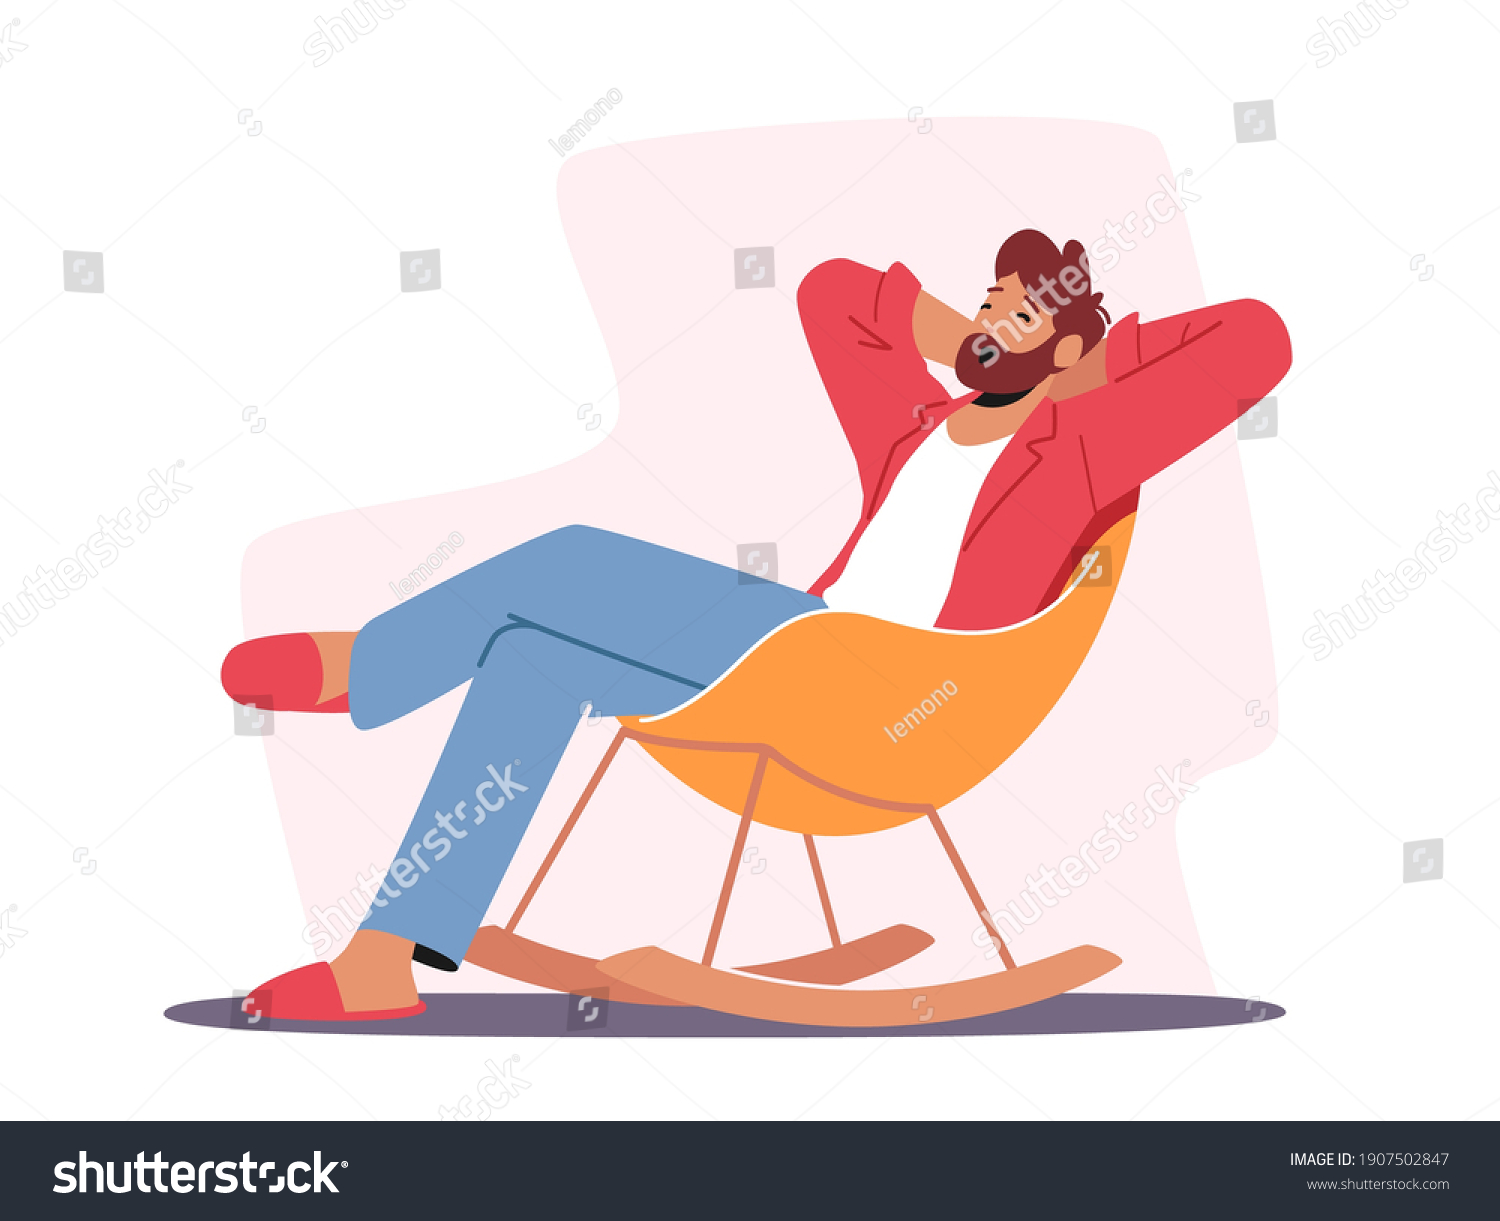 Relaxed Male Character in Home Clothes and Slippers Sitting in Comfortable Chair Yawning, Man Leisure at Home after Work or Weekend. Furniture Design, Relaxing Sparetime. Cartoon Vector Illustration #1907502847